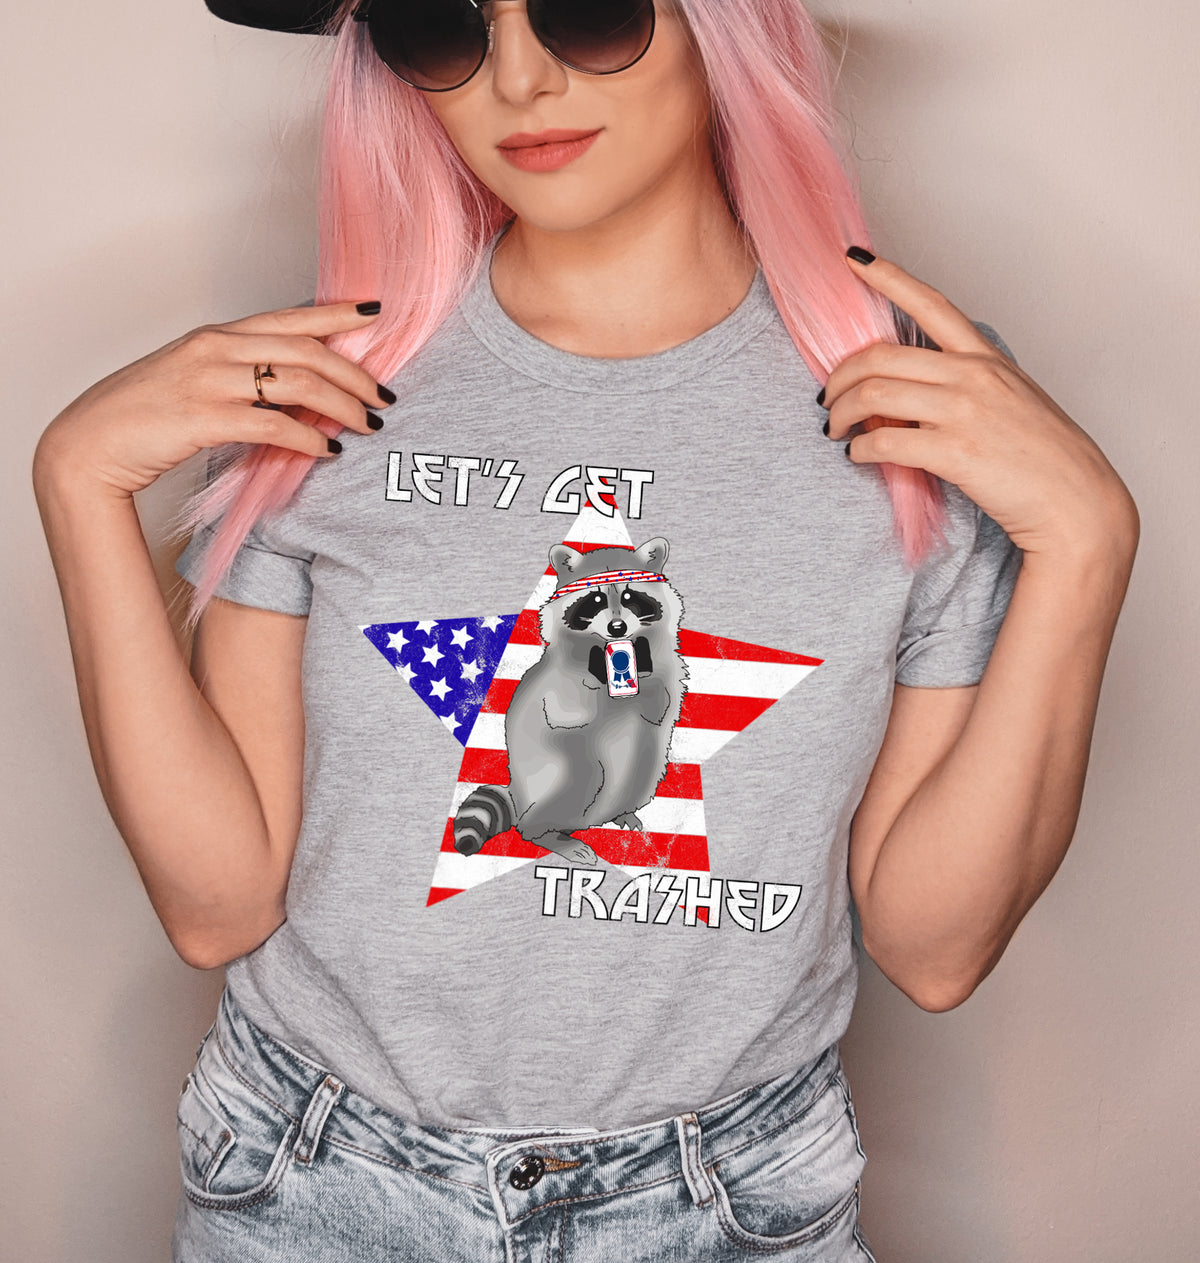 Grey shirt with a usa star and a raccoon drinking a beer that says let's get trashed - HighCiti